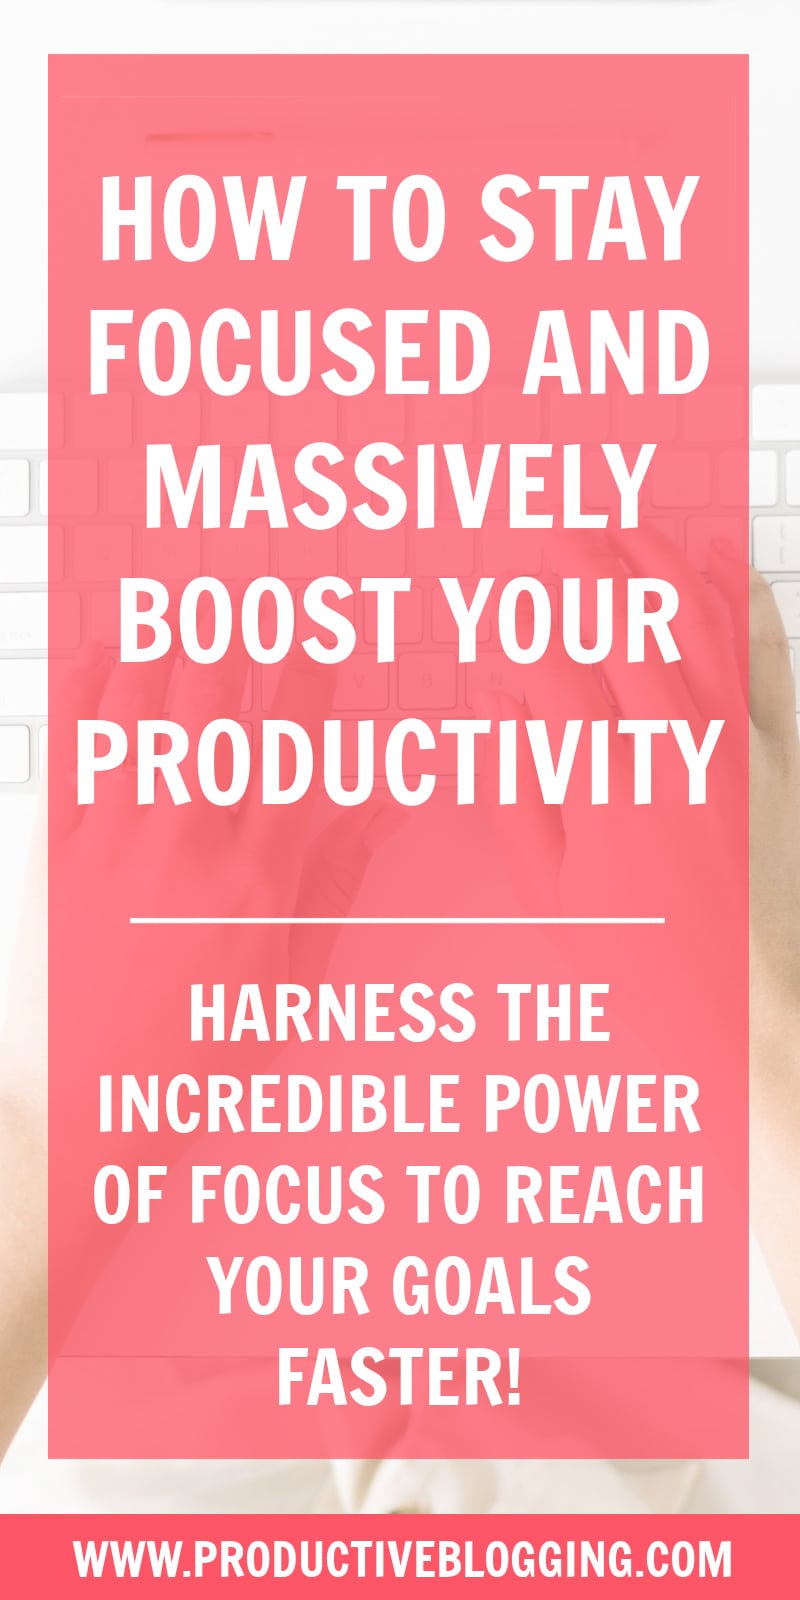 Learning how to stay focused is essential if you want to maximize your productivity. Focus will help you get more done each day and reach your goals faster. Here’s how to stay focused… and massively boost your productivity! #focus #stayfocused #goalfocused #indistractable #monotasking #multitasking #monotask #multitask #switchingcost #willpower #deepwork #dailyplanning #timeblocking #dailyactionplan #productivityhabits #productivityhacks #productivitytips #timemanagement #productiveblogging